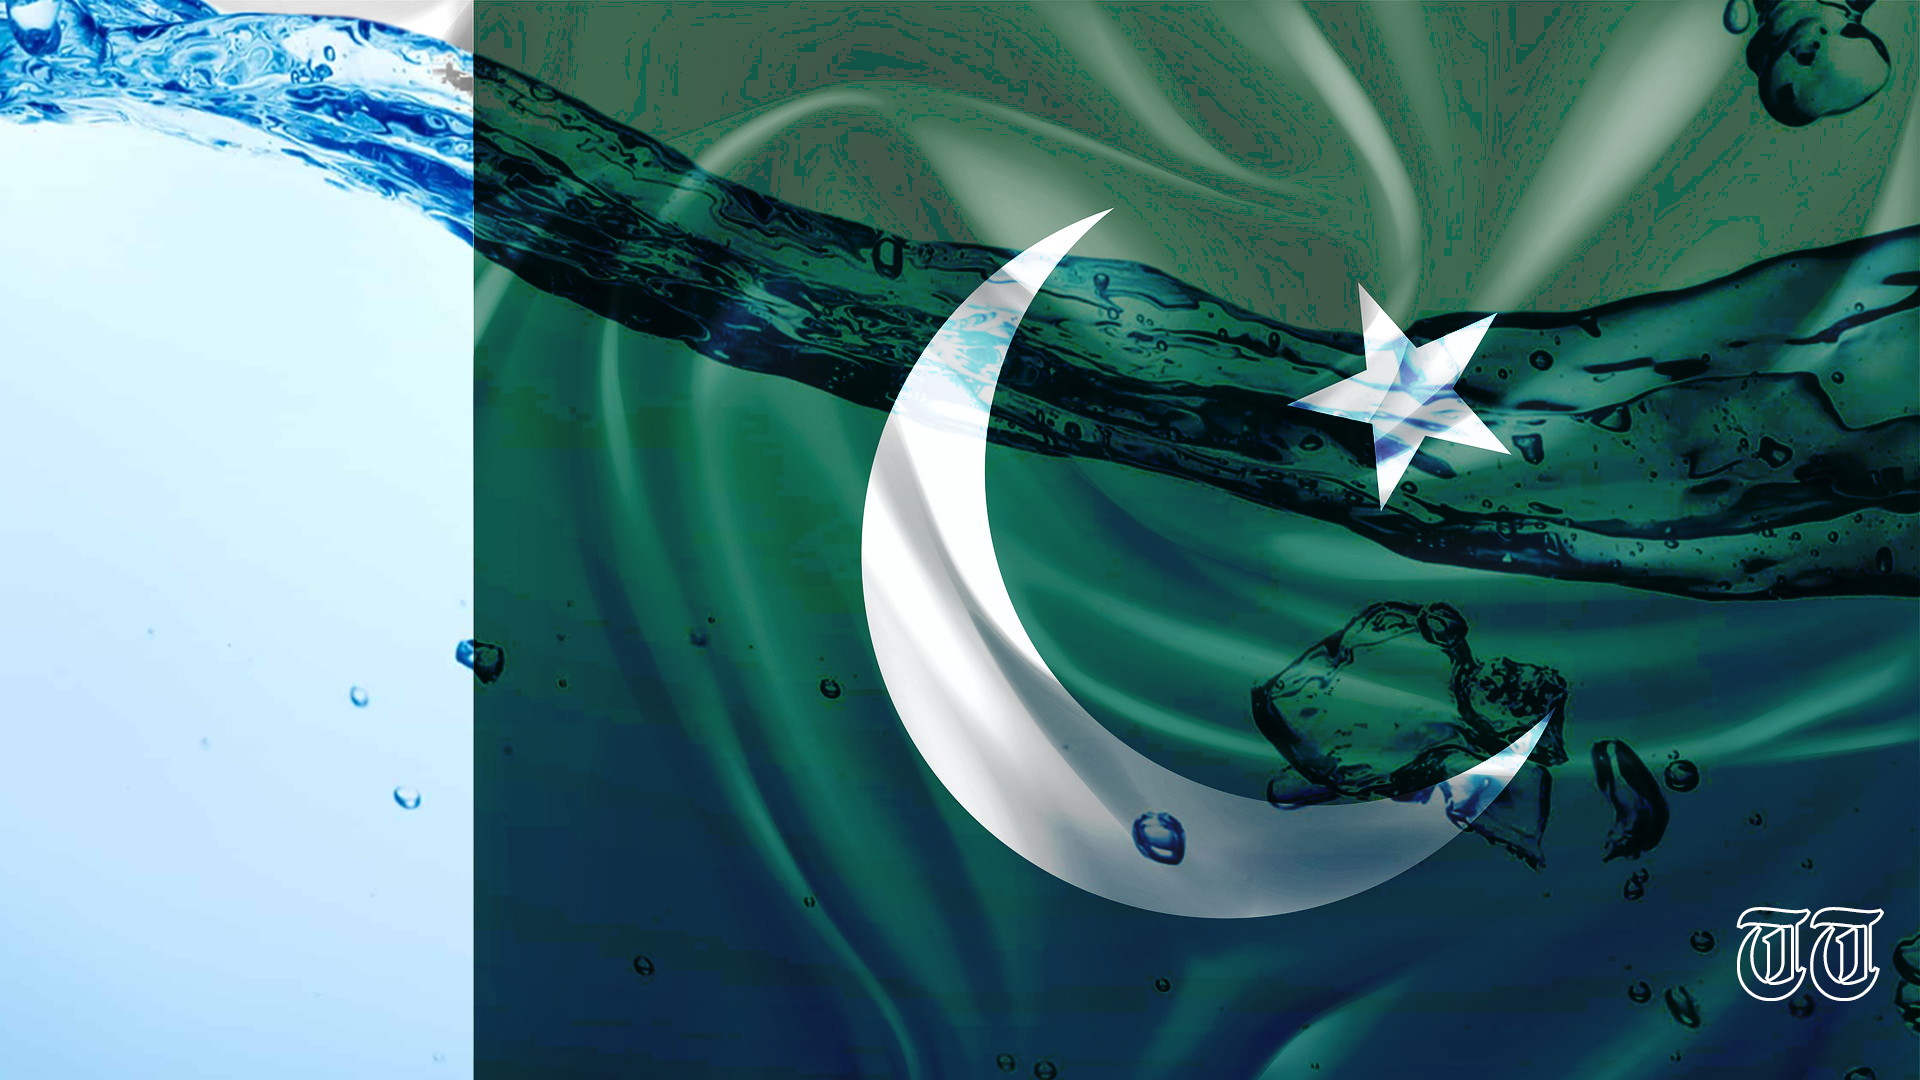 An illustration of the Pakistani flag is shown. — FILE/THE THURSDAY TIMES